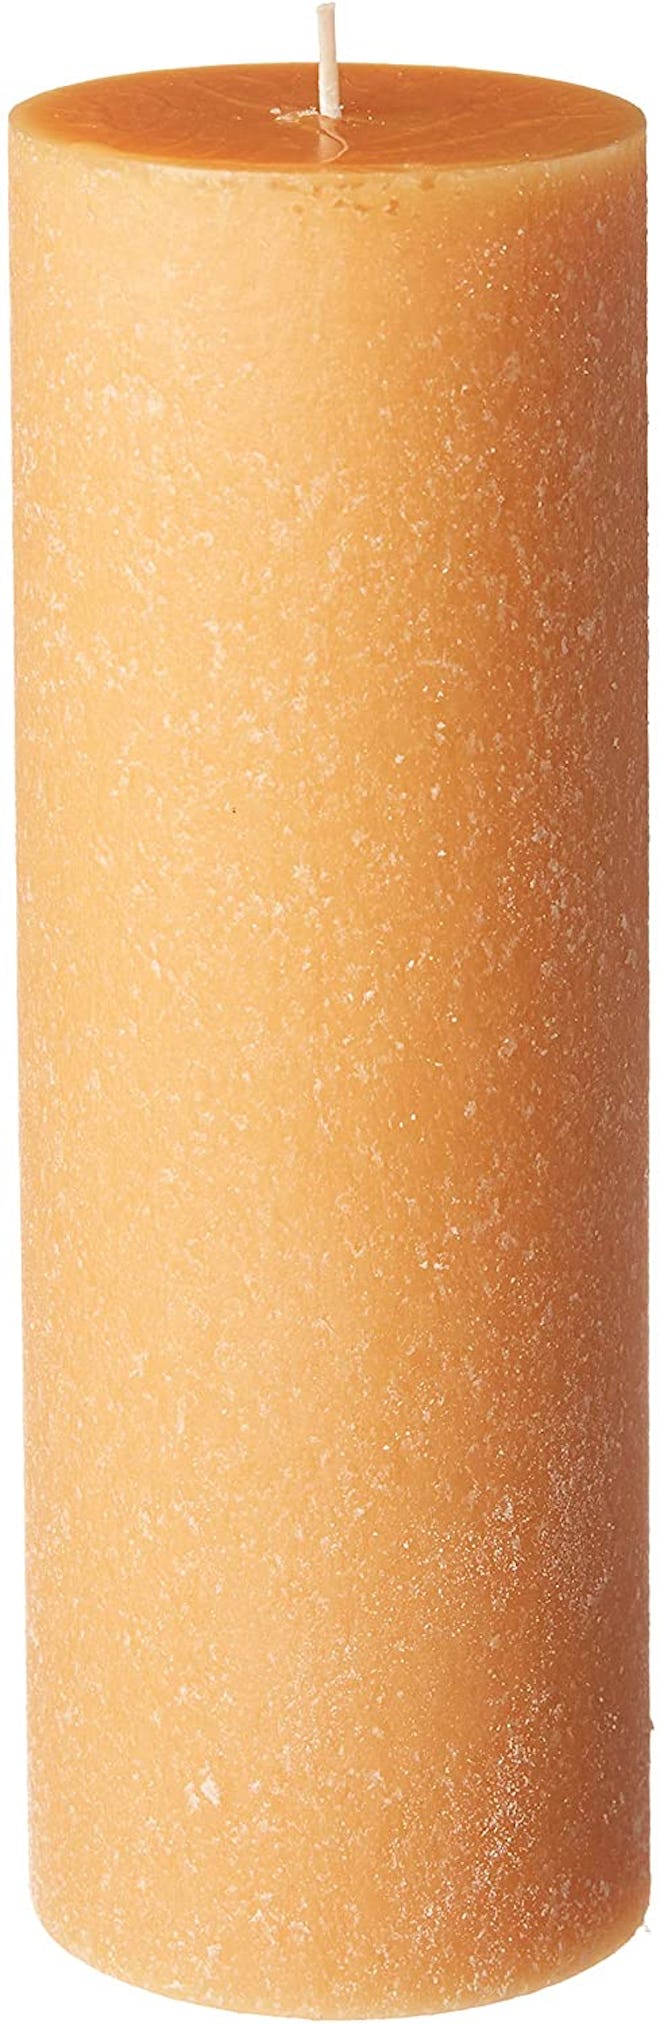 Root Candles Scented Timberline Pillar Candle